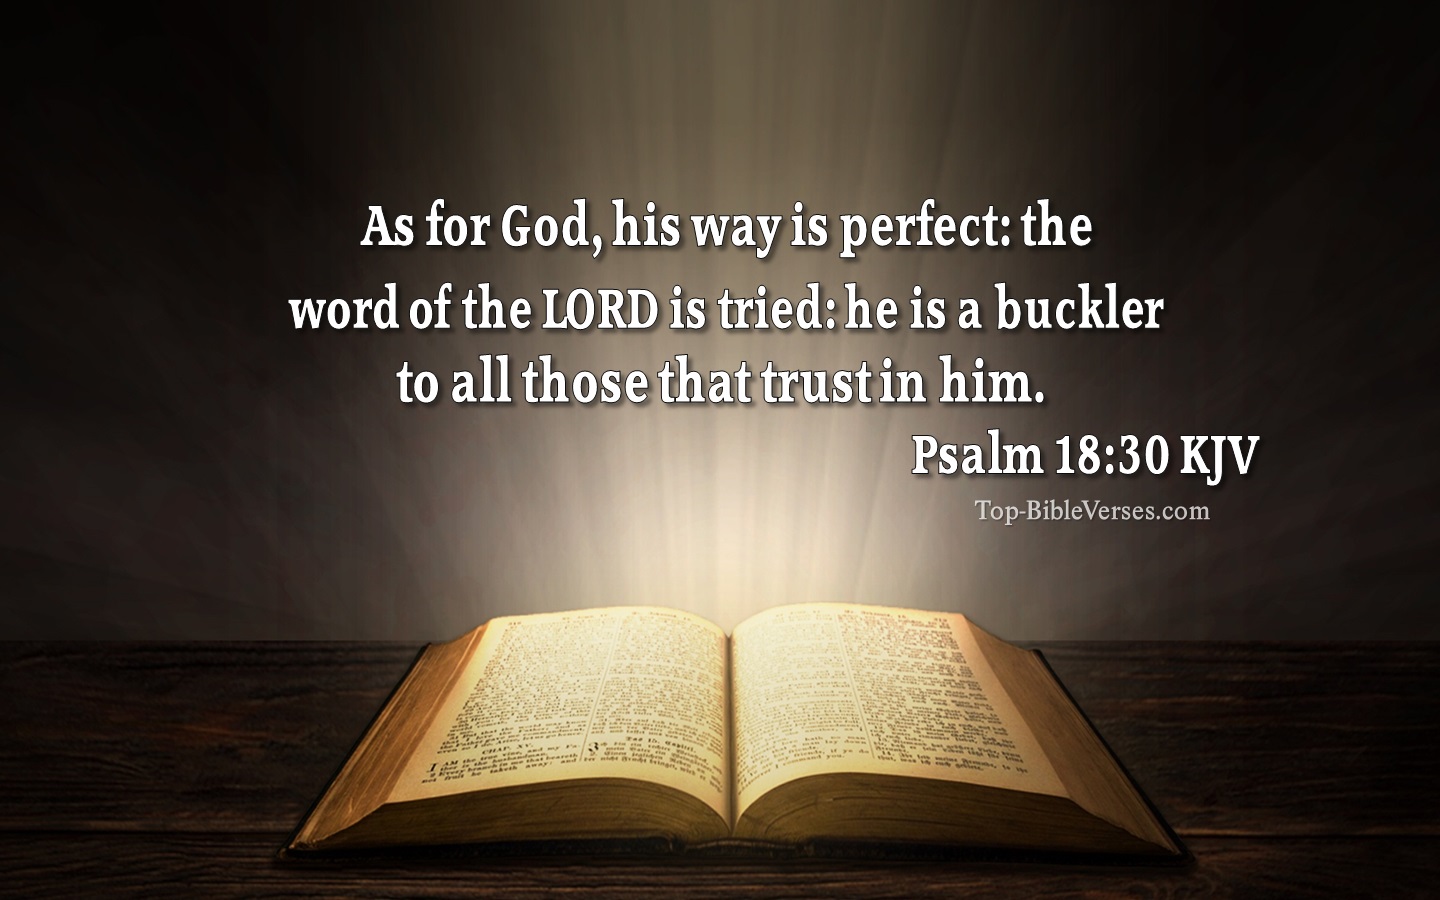 Psalm-18-30-As-for-God-his-way-is-perfect-3.jpg